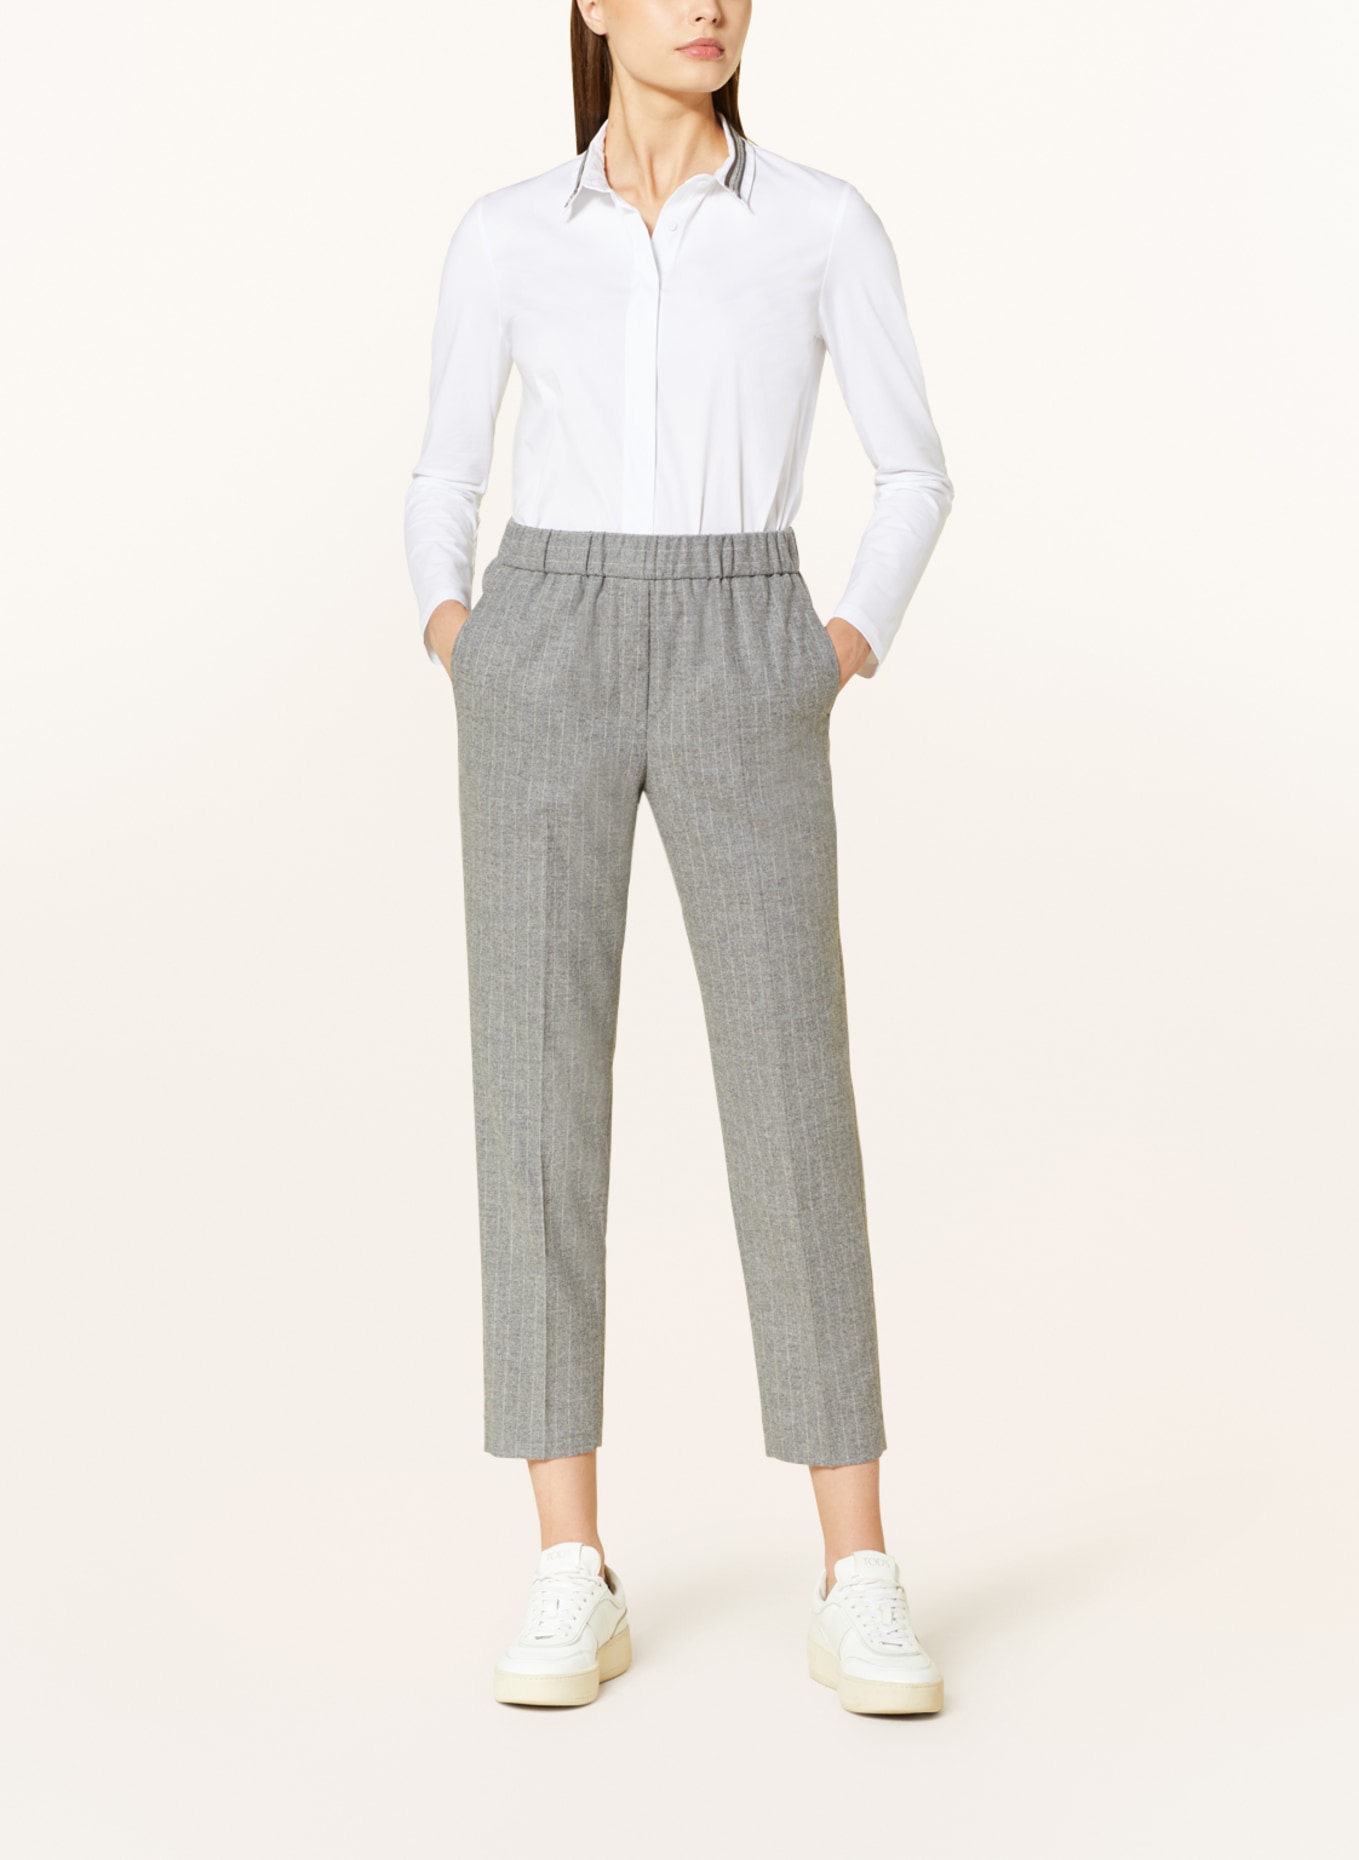 PESERICO Flannel trousers in gray